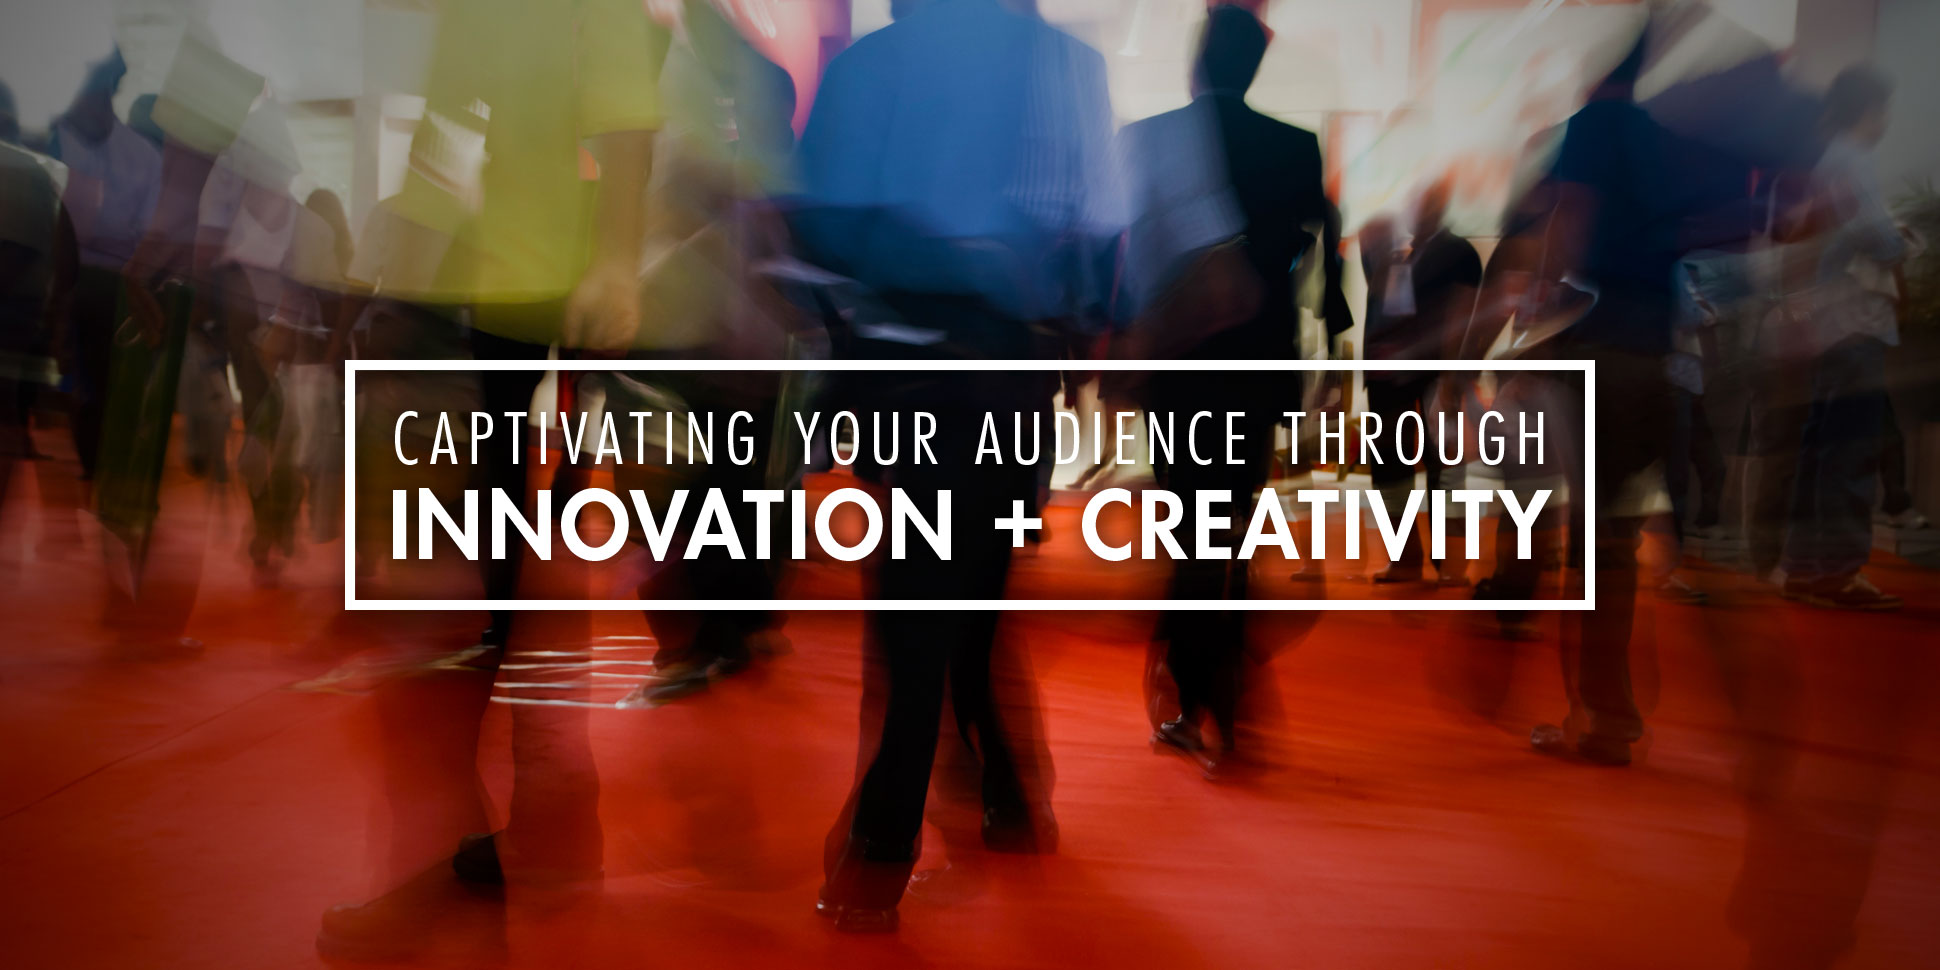 Captivating Your Audience Through Innovation + Creativity